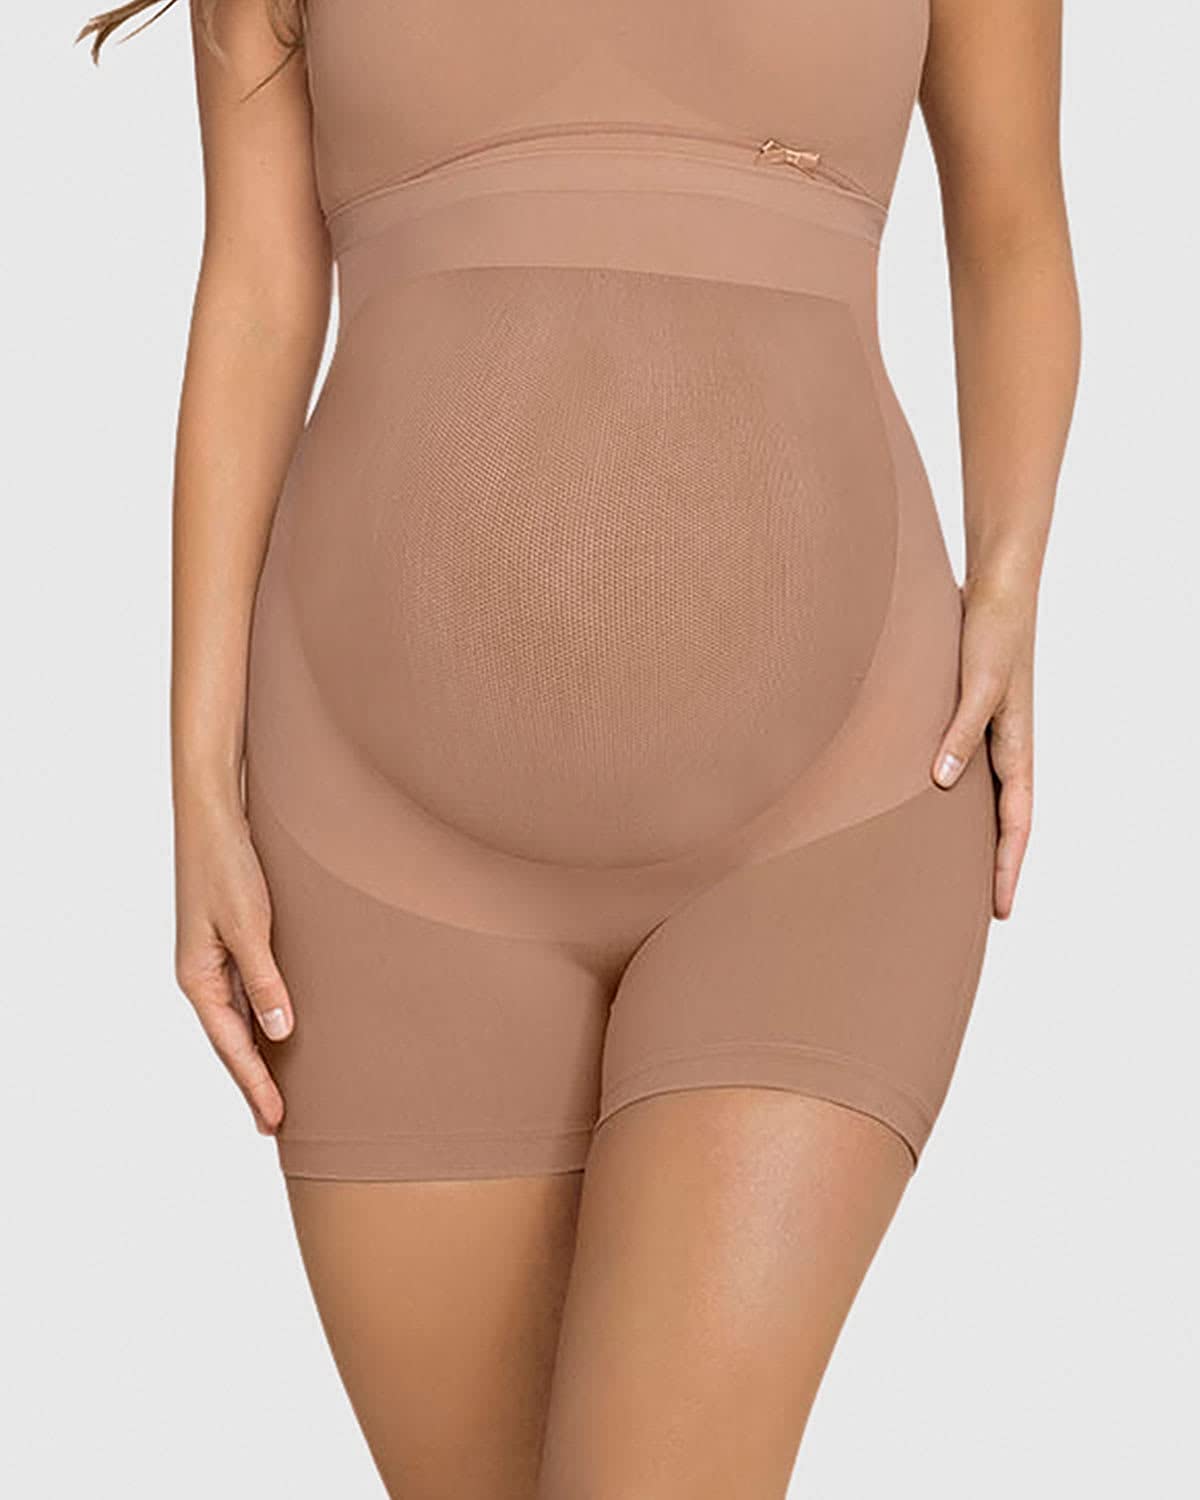 Best maternity shaper support shorts